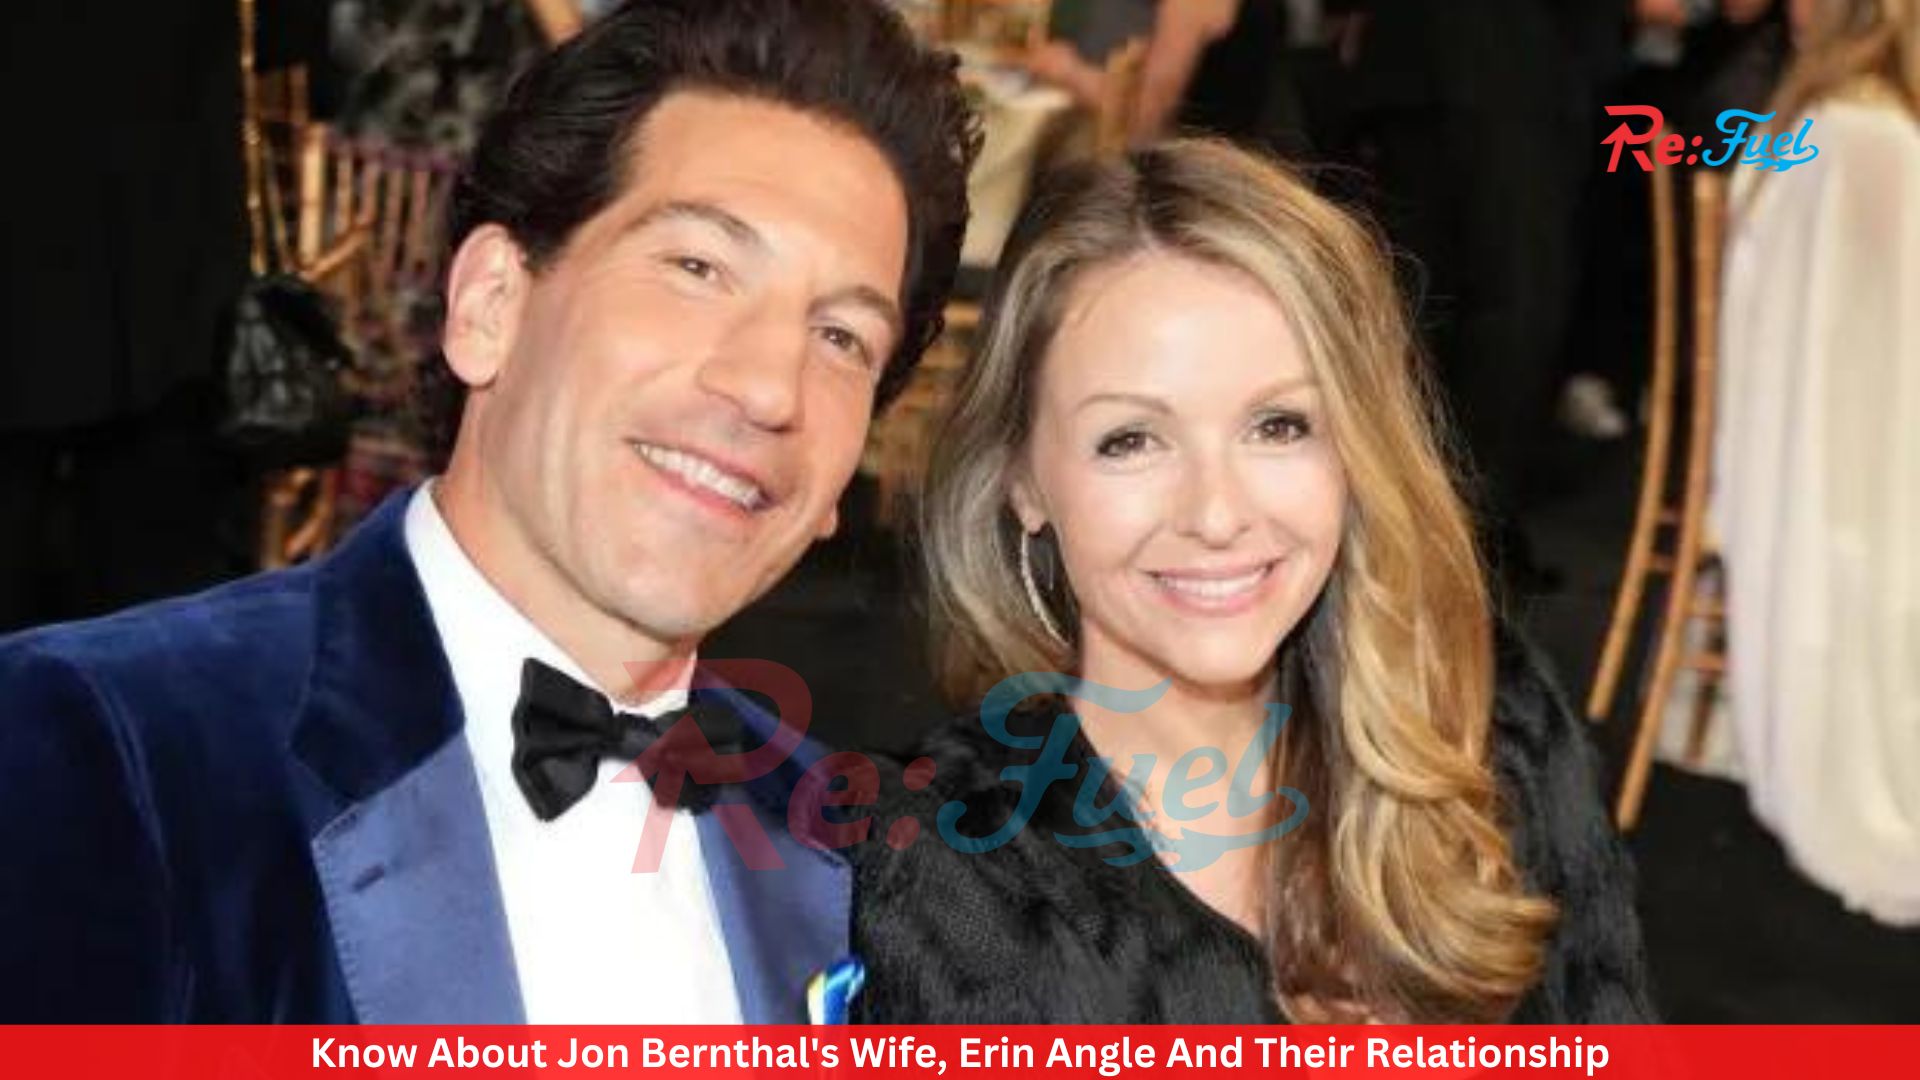 Know About Jon Bernthal's Wife, Erin Angle And Their Relationship